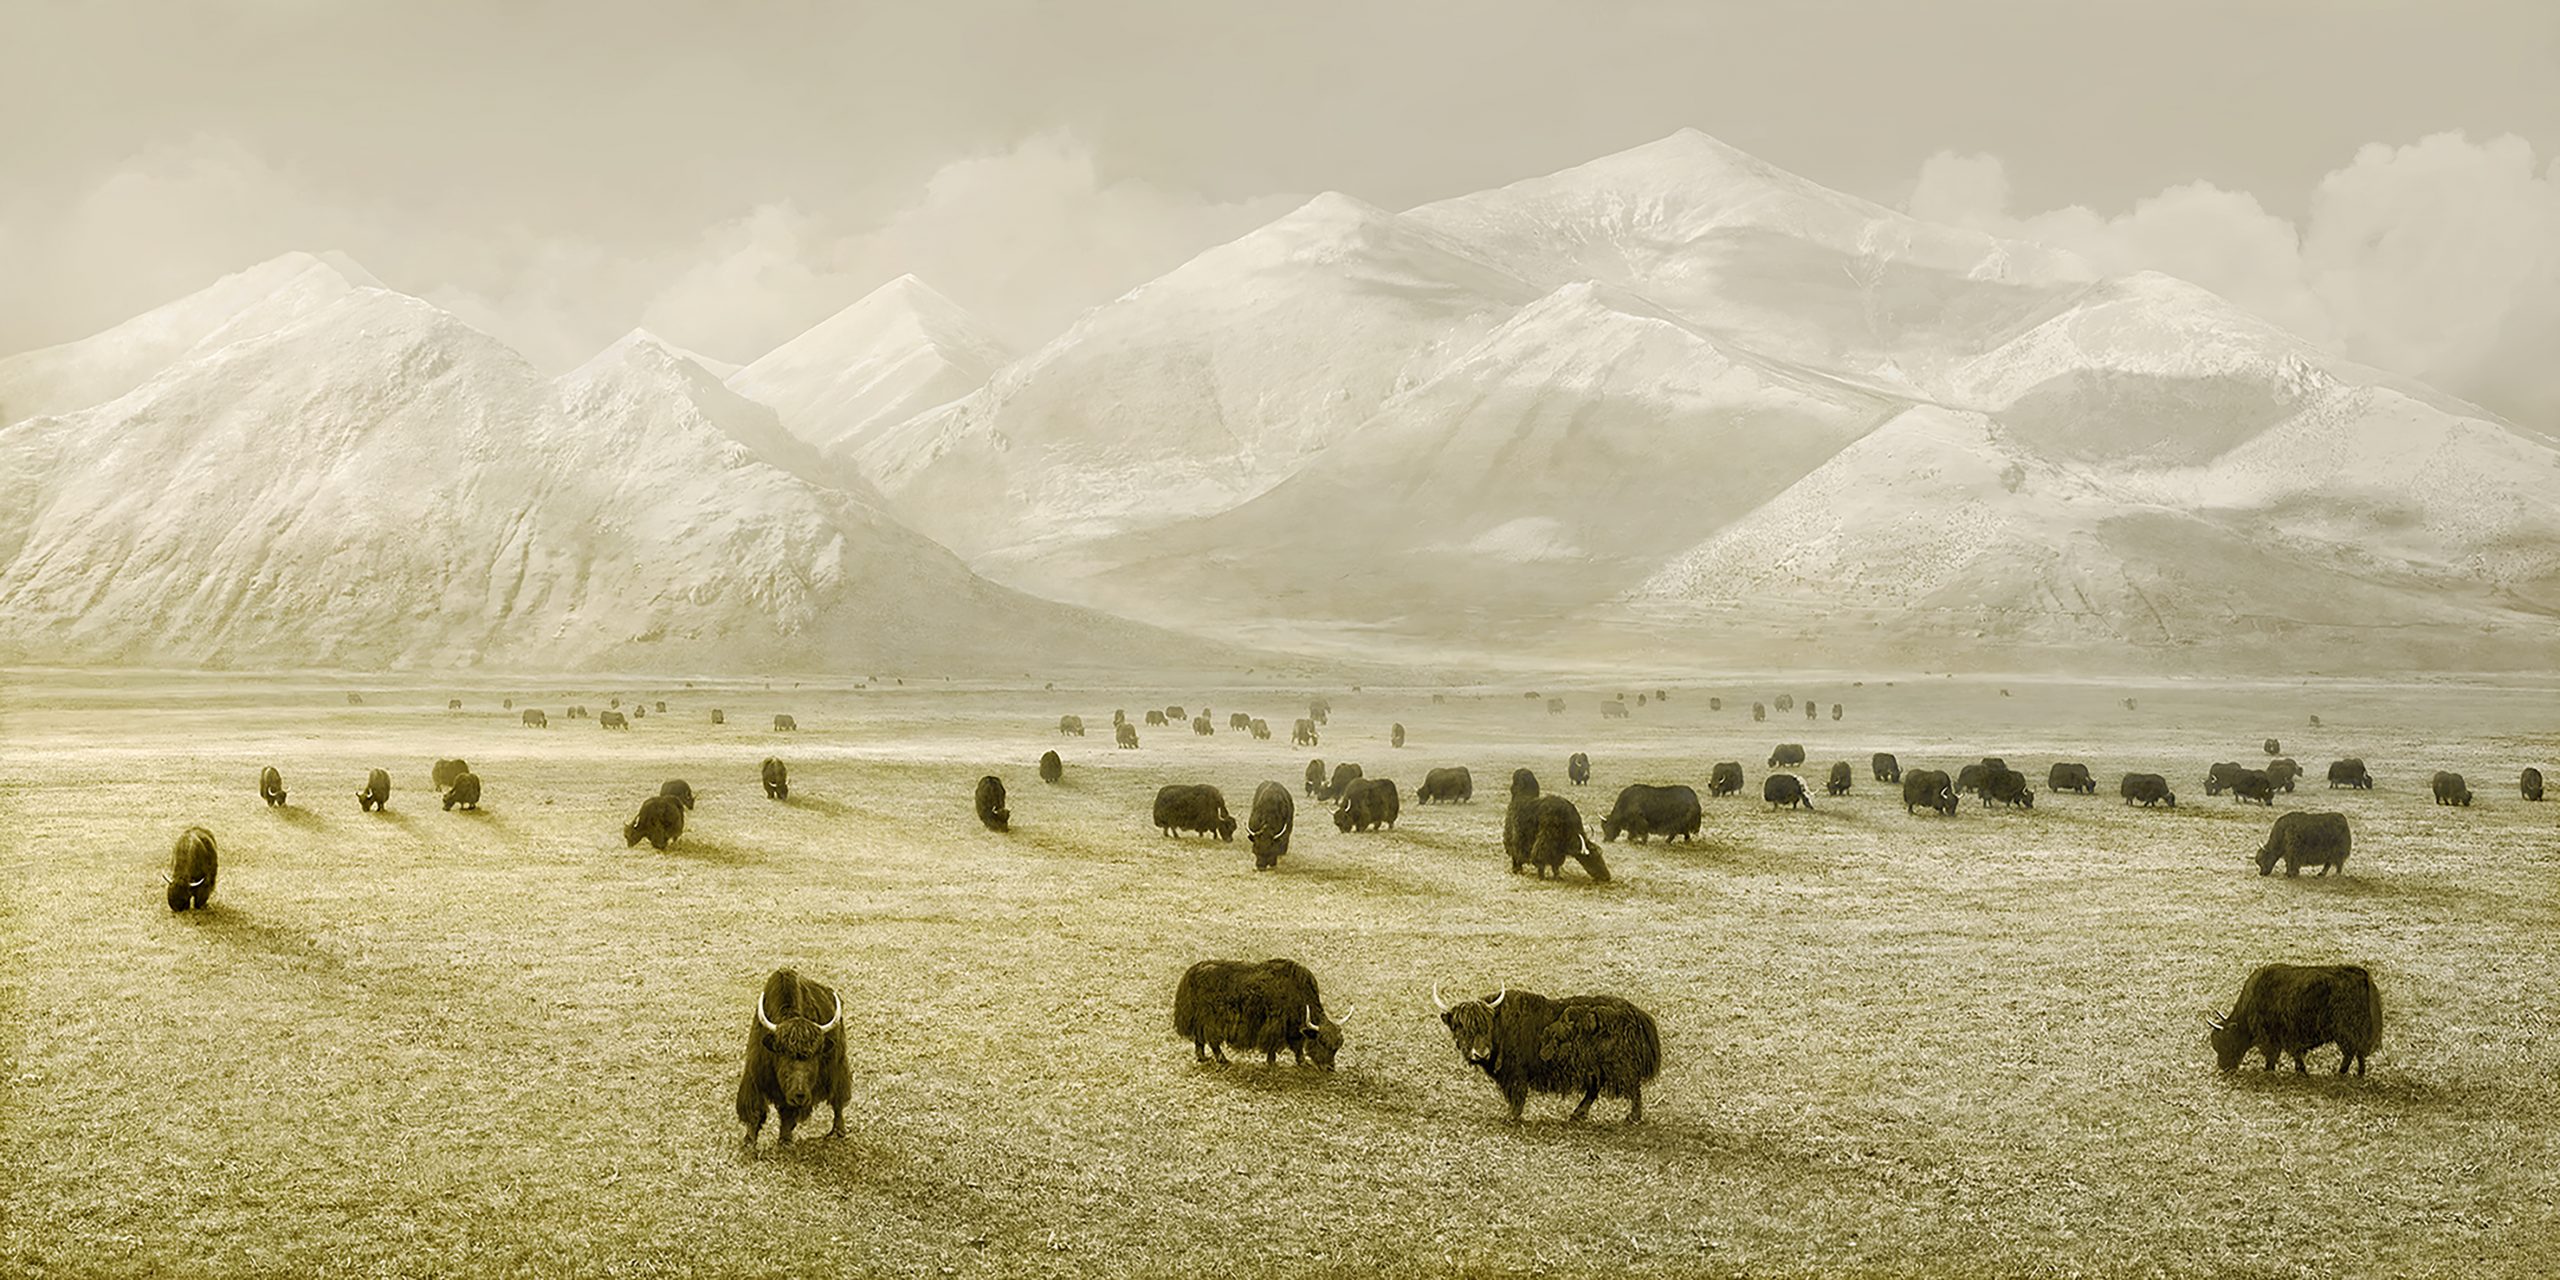 ©Irene Kung. Yak / Resilience and adaptation convey strength, 2021 D-print on rag paper Edition of 8 200 x 100 cm